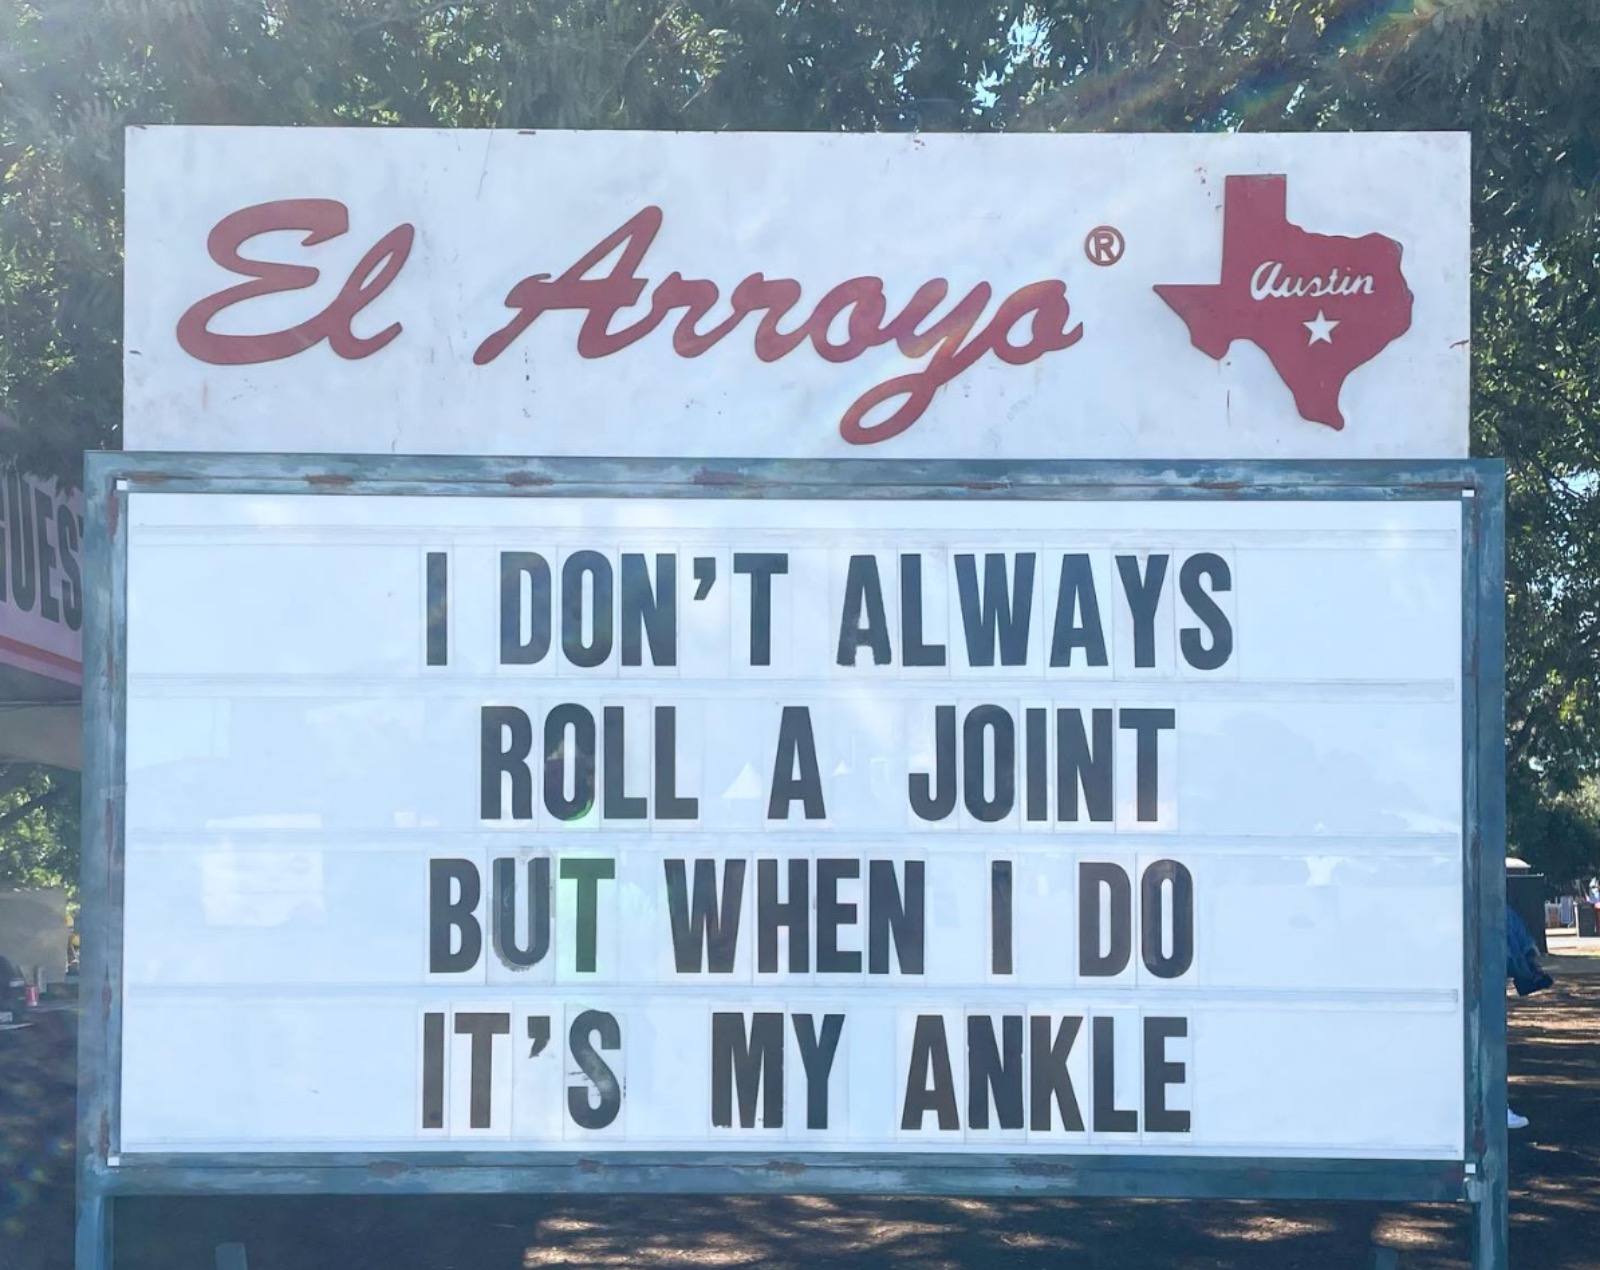 funny new meme about rolling joints and ankles